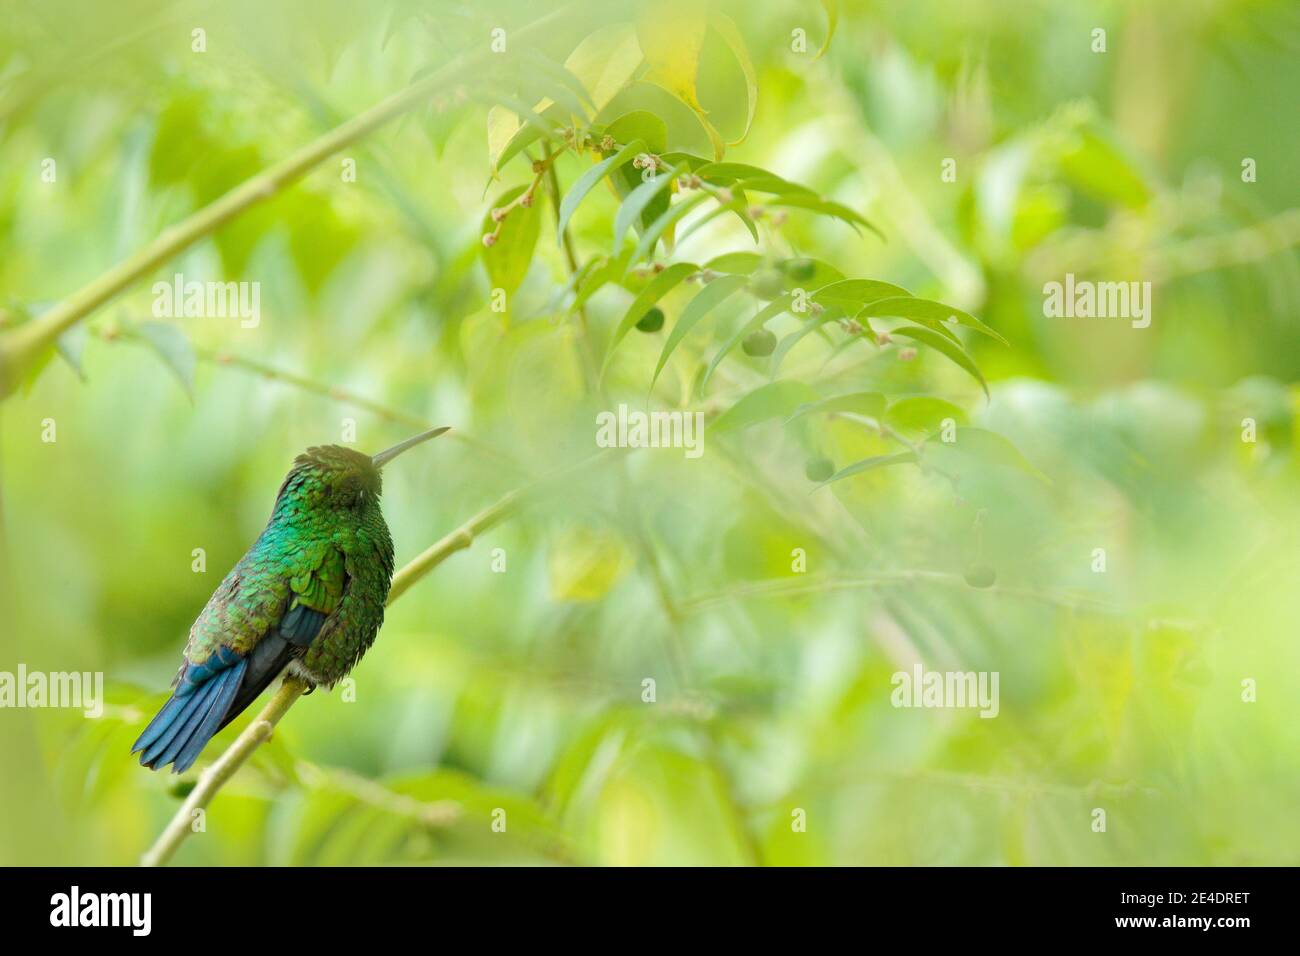 Blue-tailed Emerald, Chlorostilbon mellisugus, hummingbird in the Colombian tropical forest, blue an green glossy bird in the nature habitat. Wildlife Stock Photo